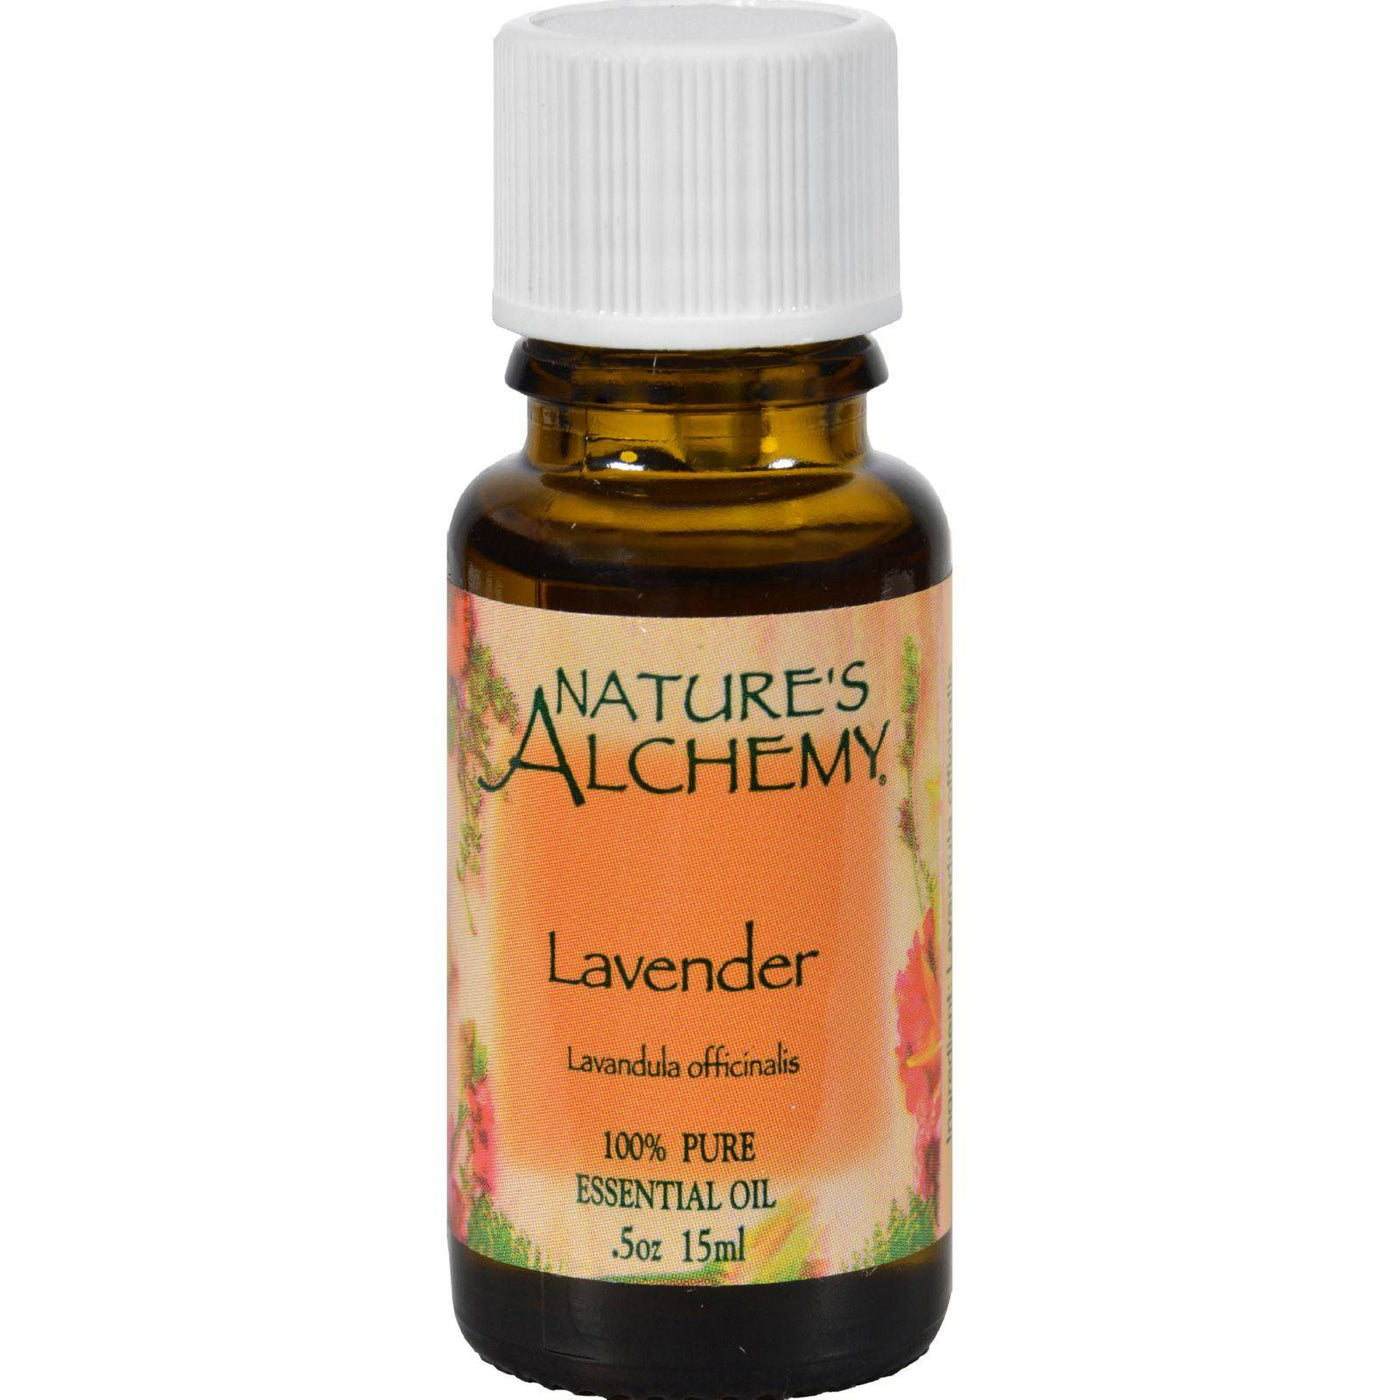 Buy Nature's Alchemy 100% Pure Essential Oil Lavender - 0.5 Fl Oz  at OnlyNaturals.us